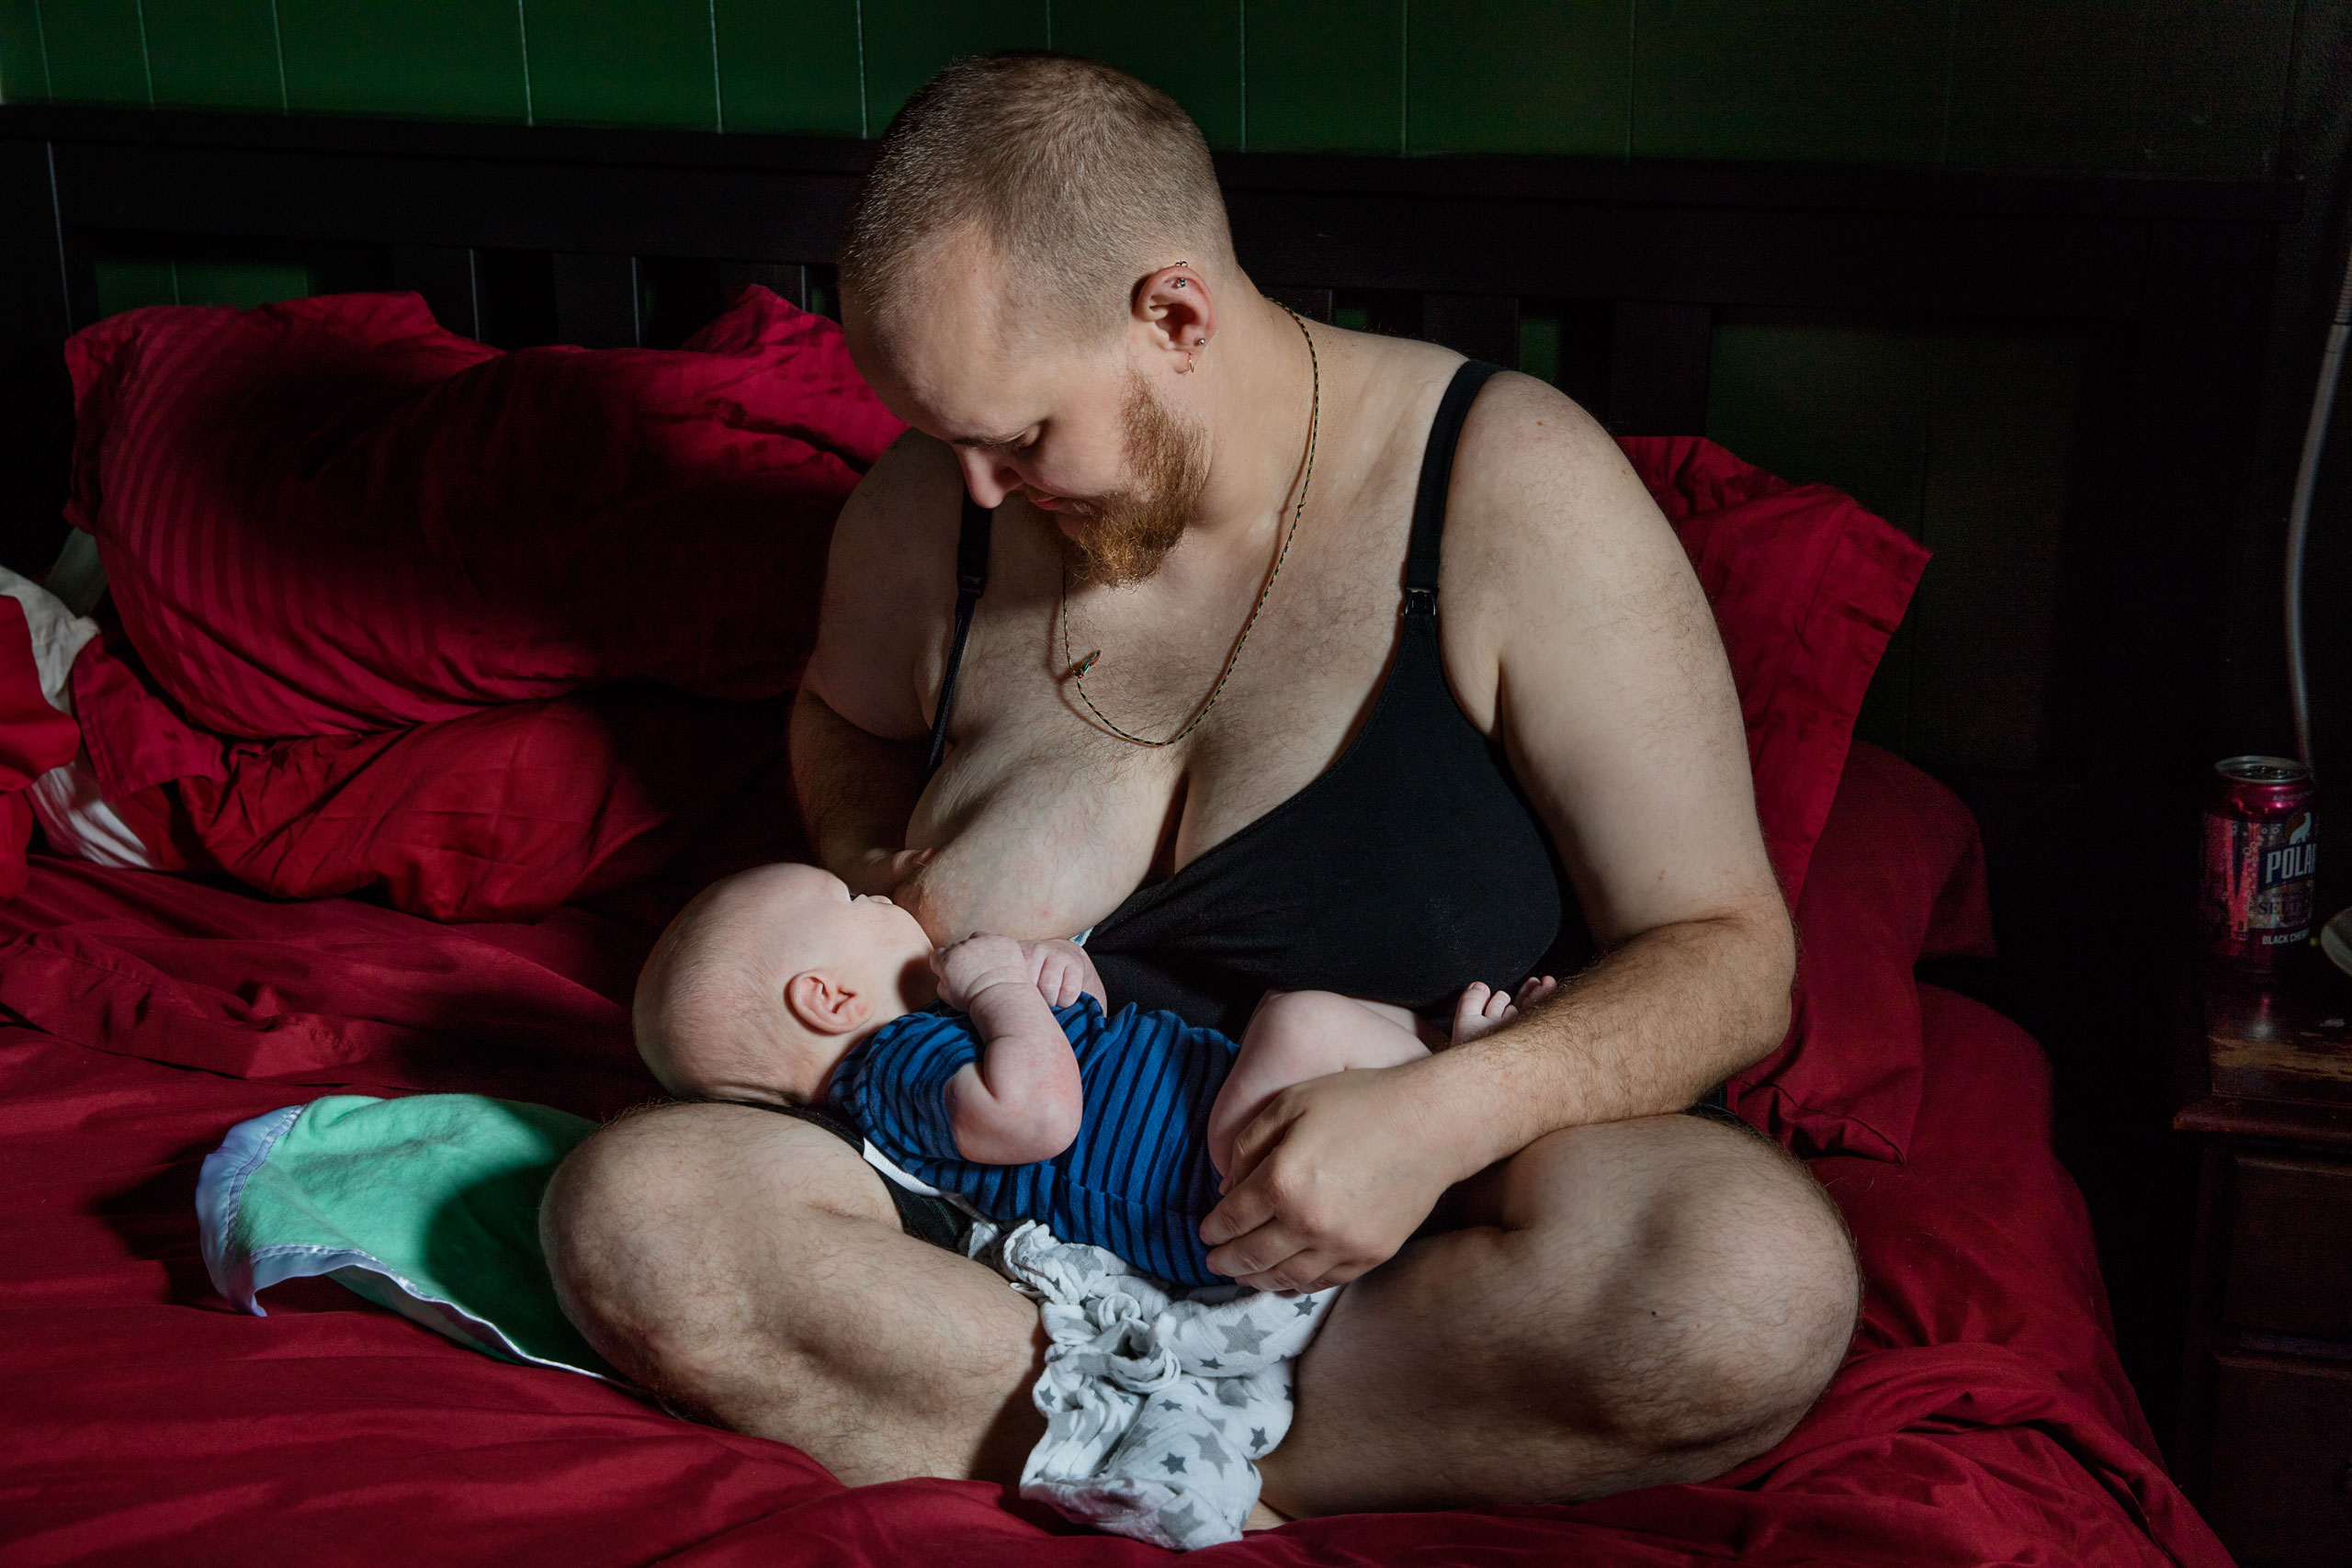 Evan, who stopped his hormone treatments before trying to get pregnant, chest-feeds his newborn son in their Massachusetts home (Elinor Carucci for TIME)